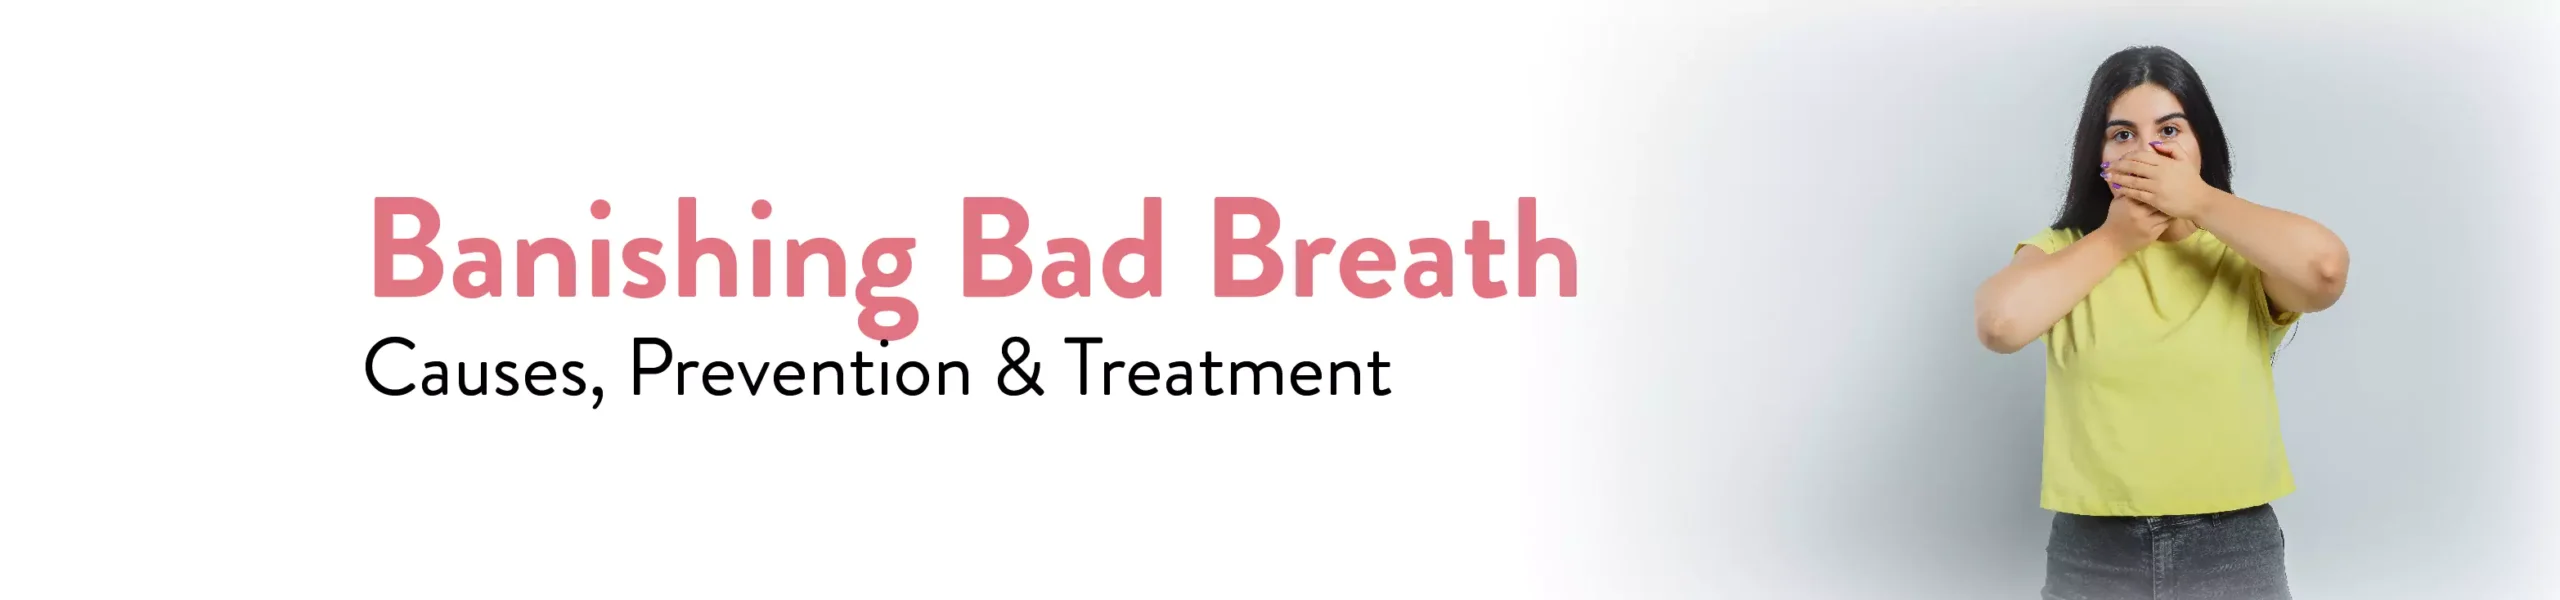 Banishing Bad Breath Causes, Prevention and Treatment